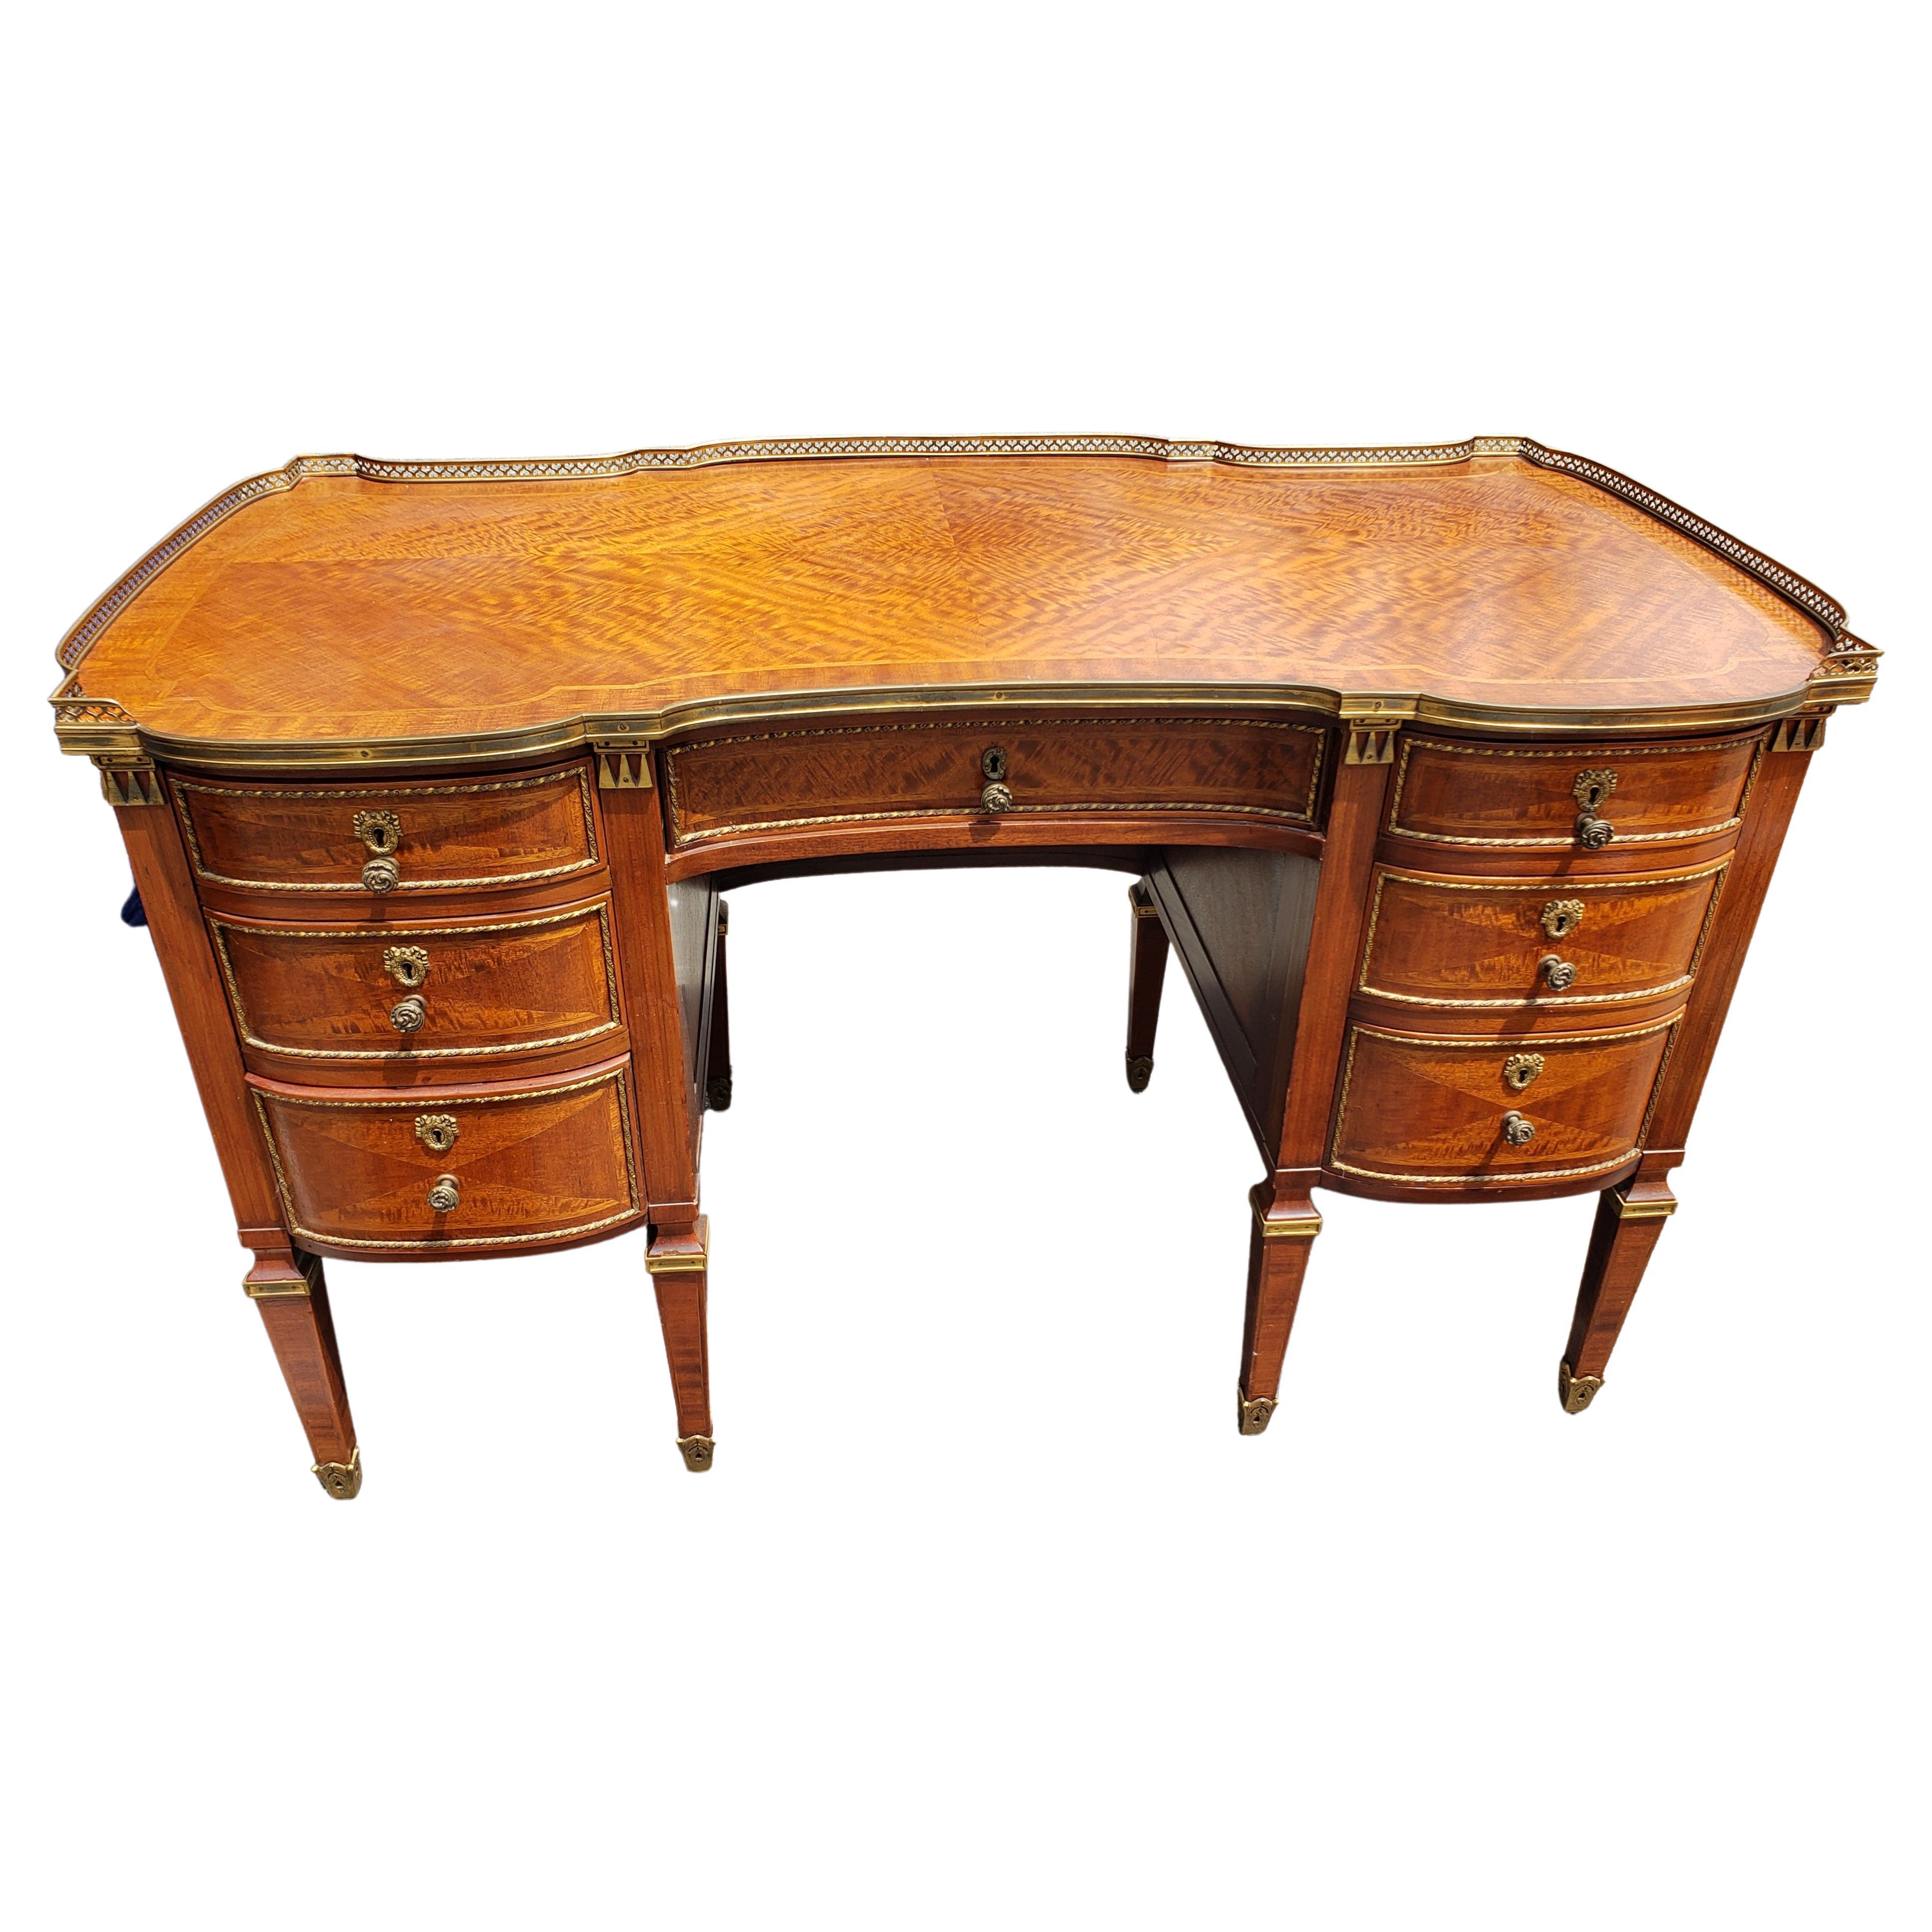 An outsanding Louis XVI Style Ormolu Mounted , Mahogany Burl and Marquetry Desk with top gallery. Very good antique condition. Intricate Marquetry work all over to the legs terminating cast brass sabot. Very sturday with dovetail drawers functioning